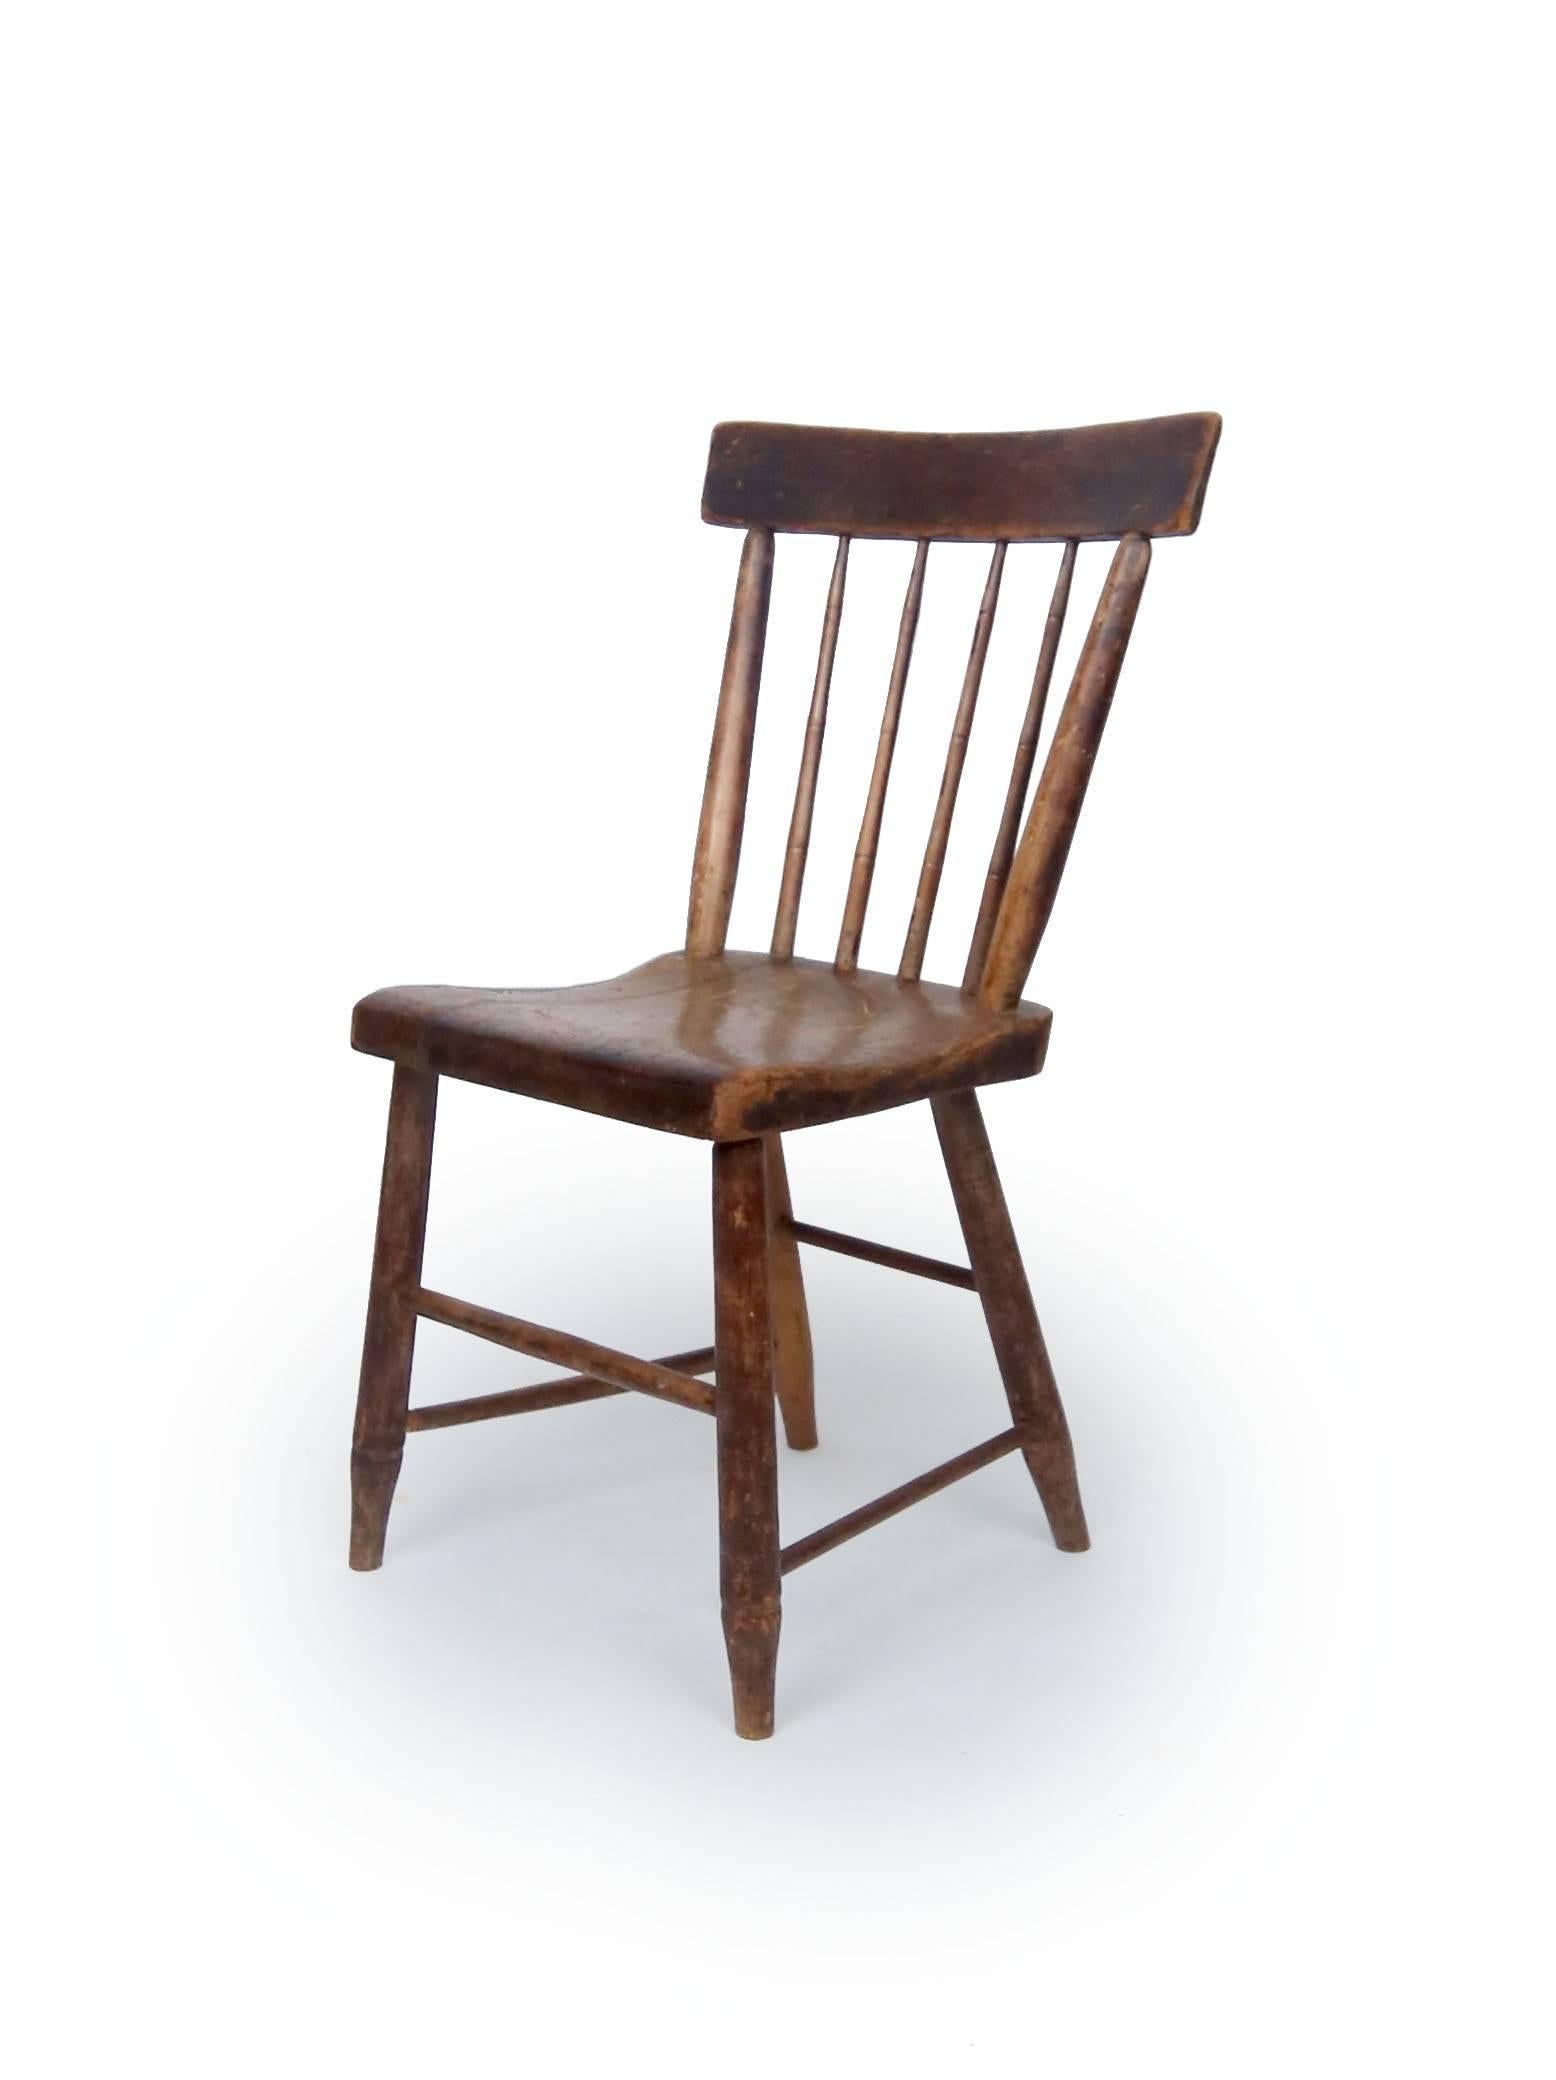 An handsome rod back Windsor chair. Splats turned with bamboo hip detail. Hickory and pine with solid plank seats, American, circa 1830.